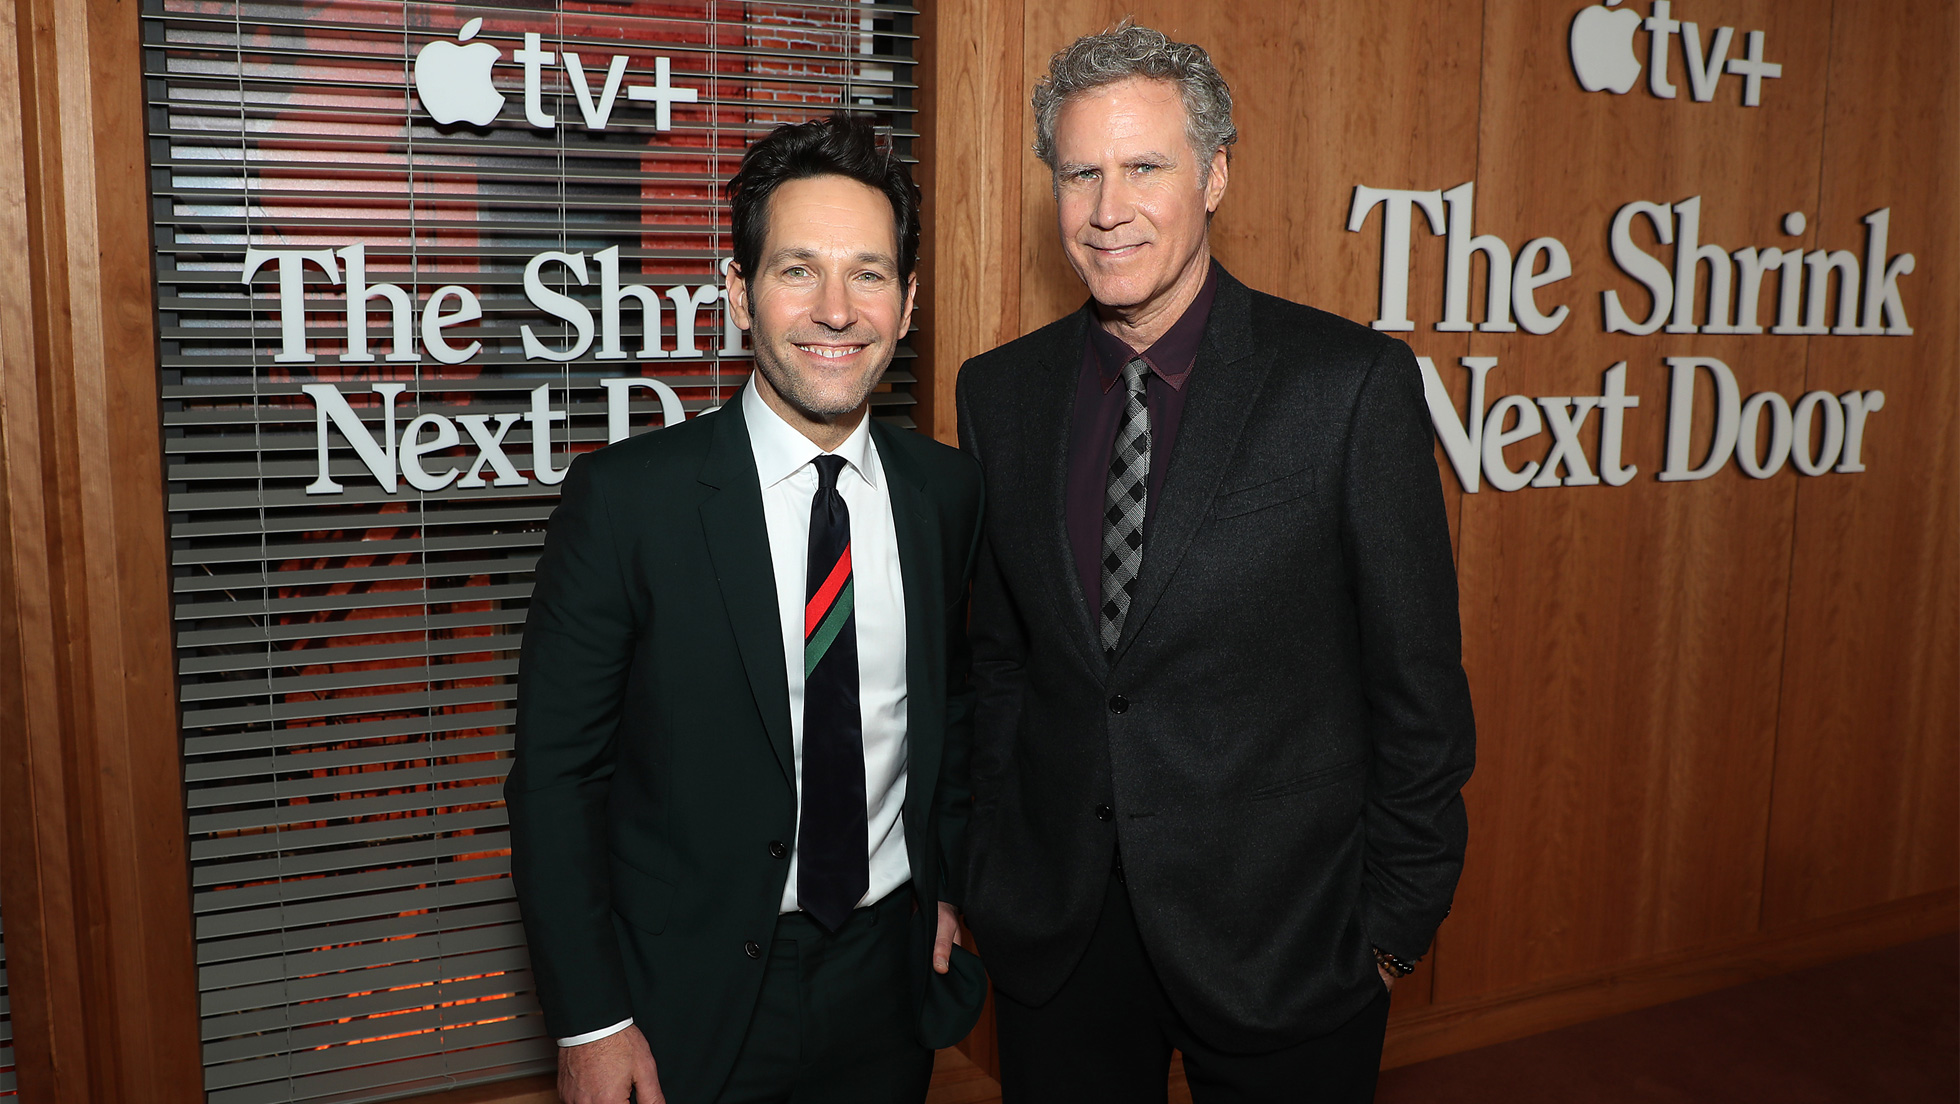 Paul Rudd and Will Ferrell at the premier of "The Shrink Next Door"